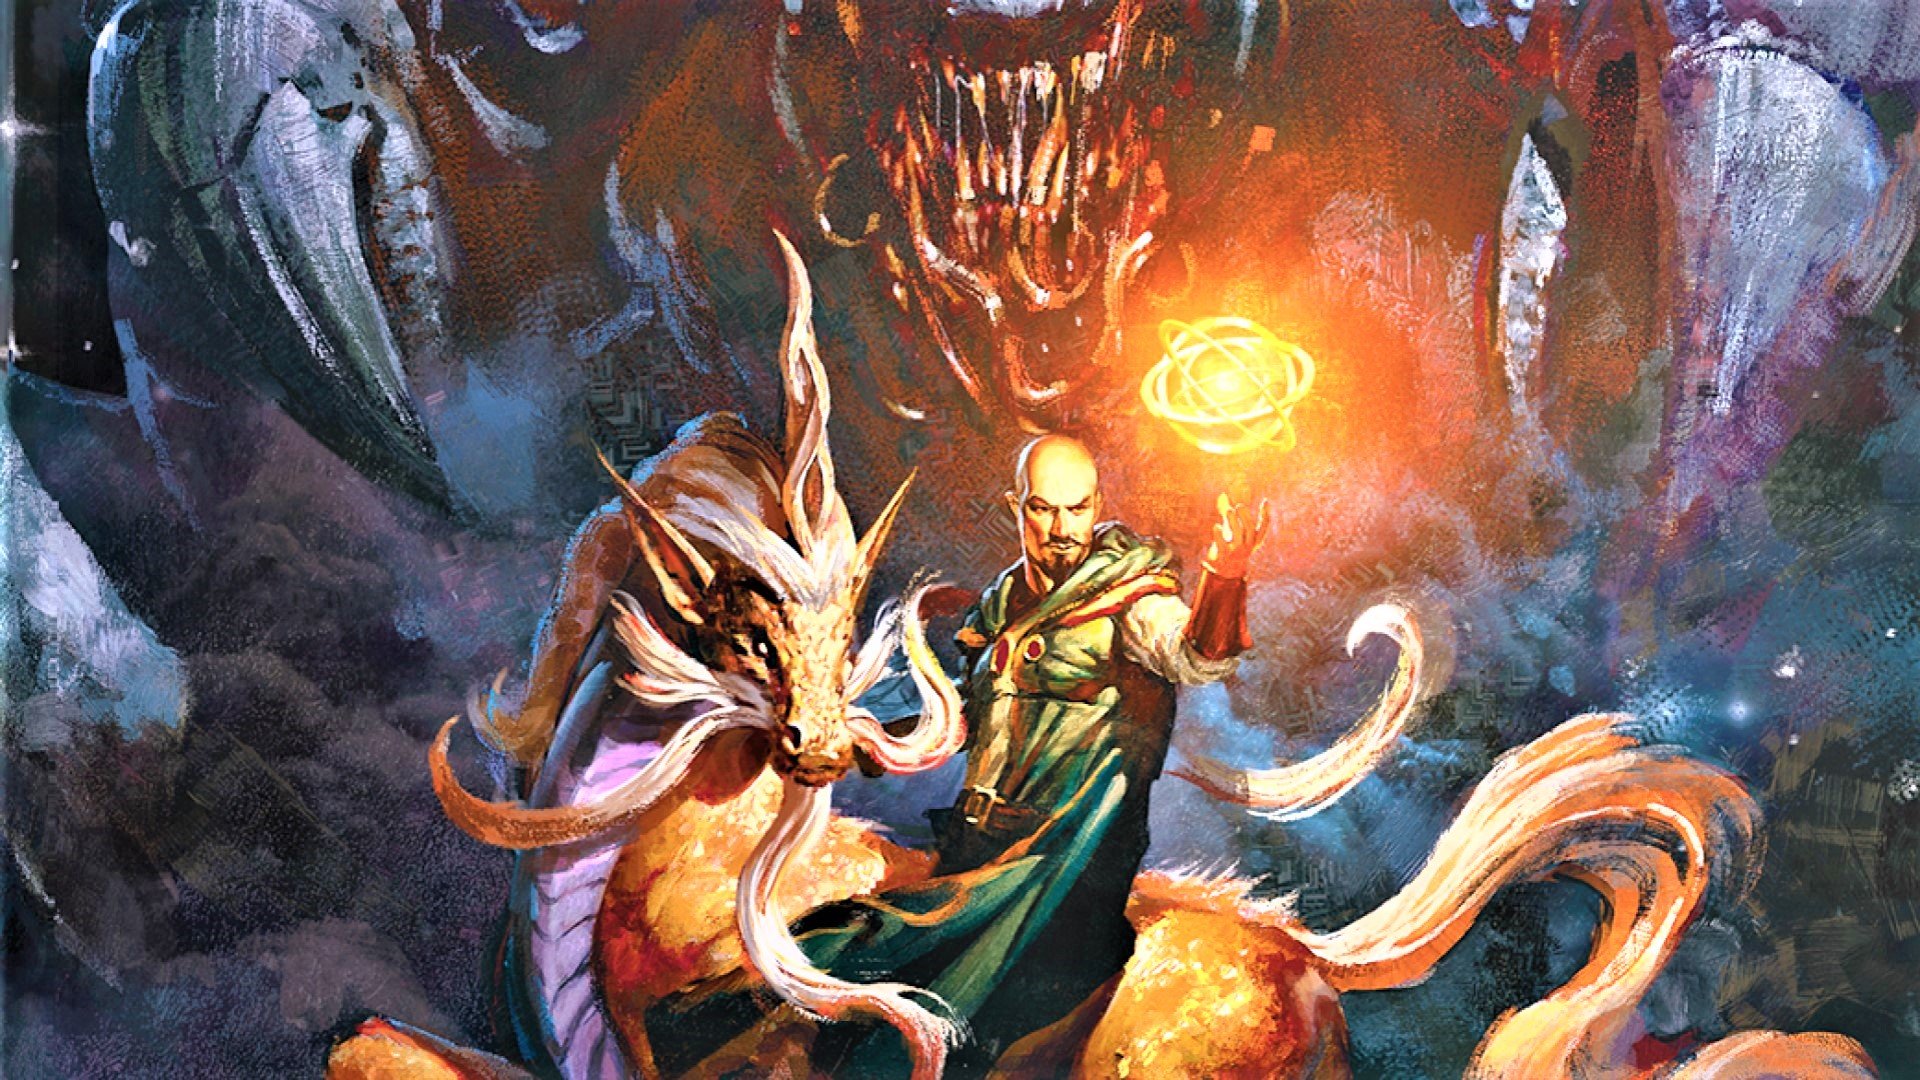 D&D 6E release date - Wizards artwork showing the wizard Mordenkainen, from the cover of Monsters of the Multiverse